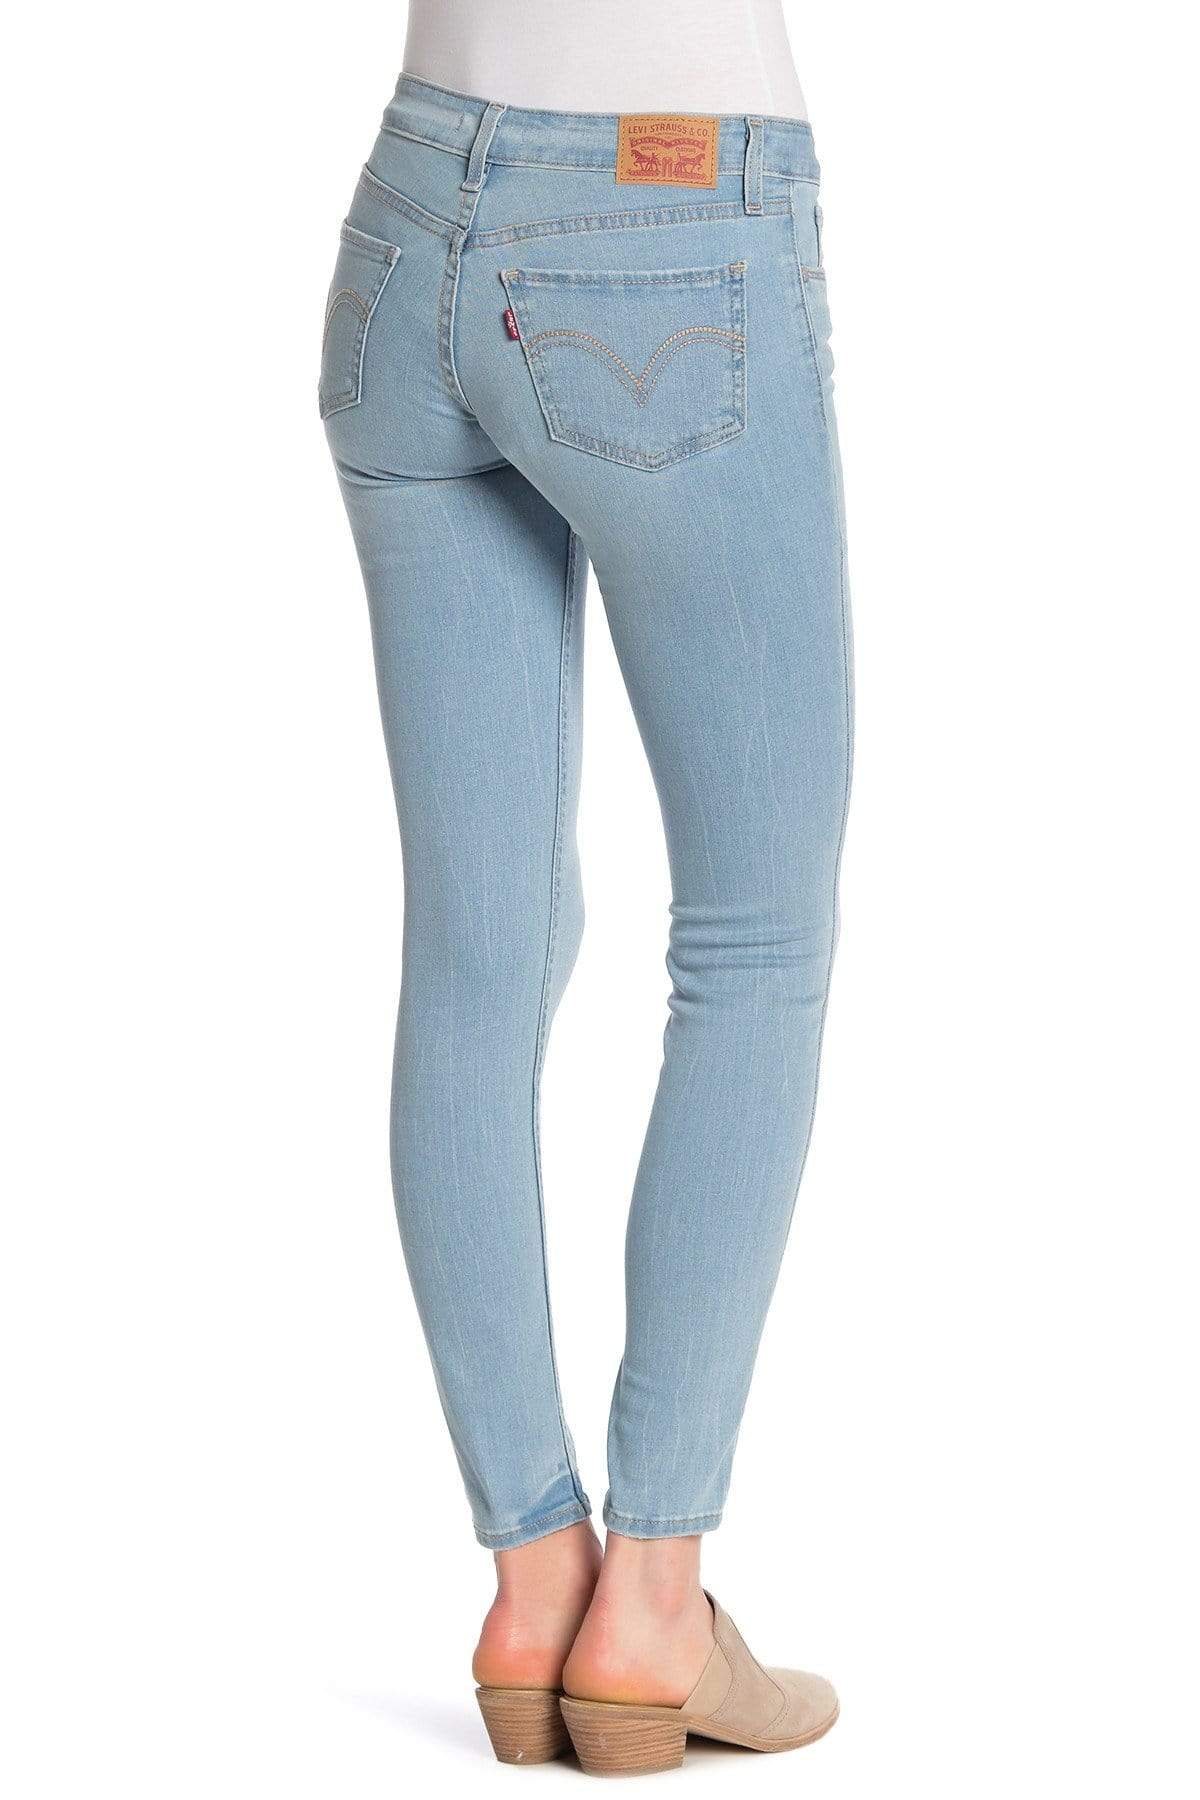 LEVI'S - 535 Super Skinny Leg Low Rise Jeans – Brands and Beyond